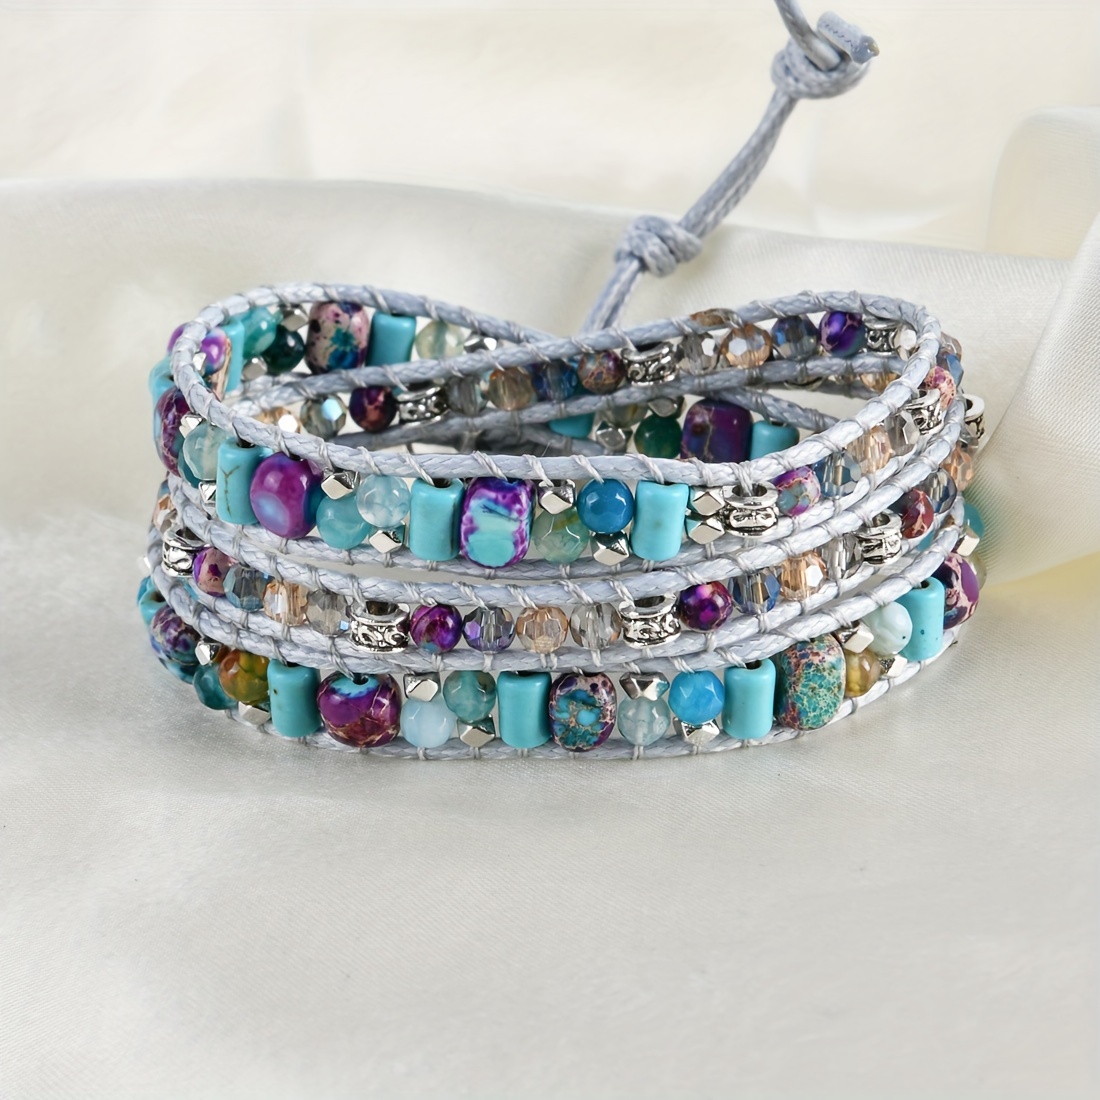 

Exquisite Multi Layer Bracelet Colorful Stones Inlaid Bohemian Ethic Style For Women Hand-woven Hand String